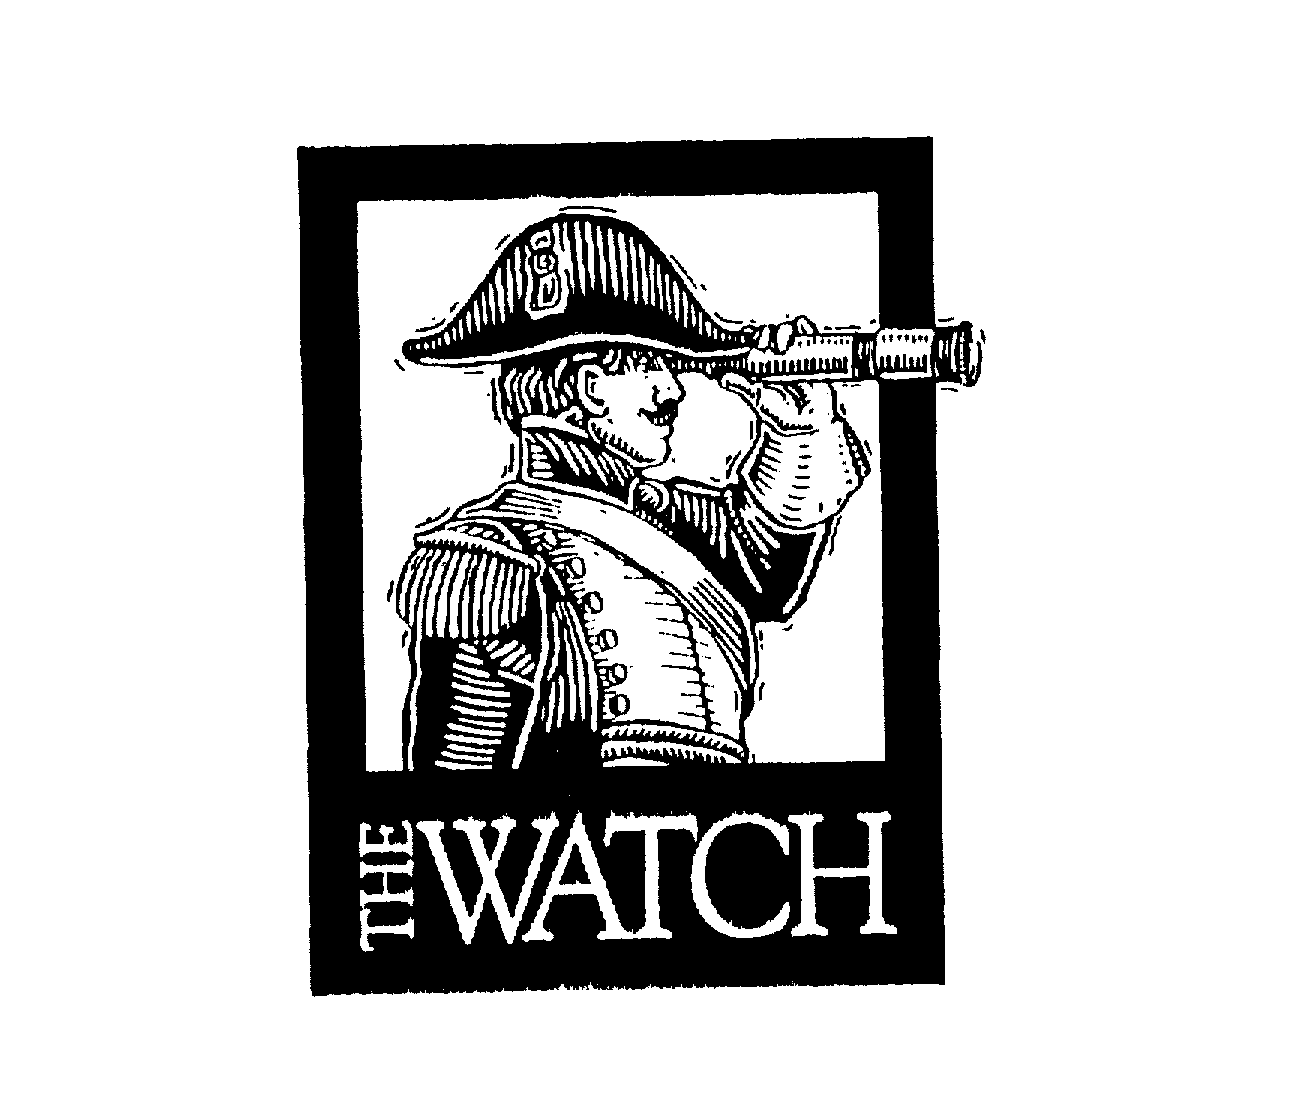  THE WATCH